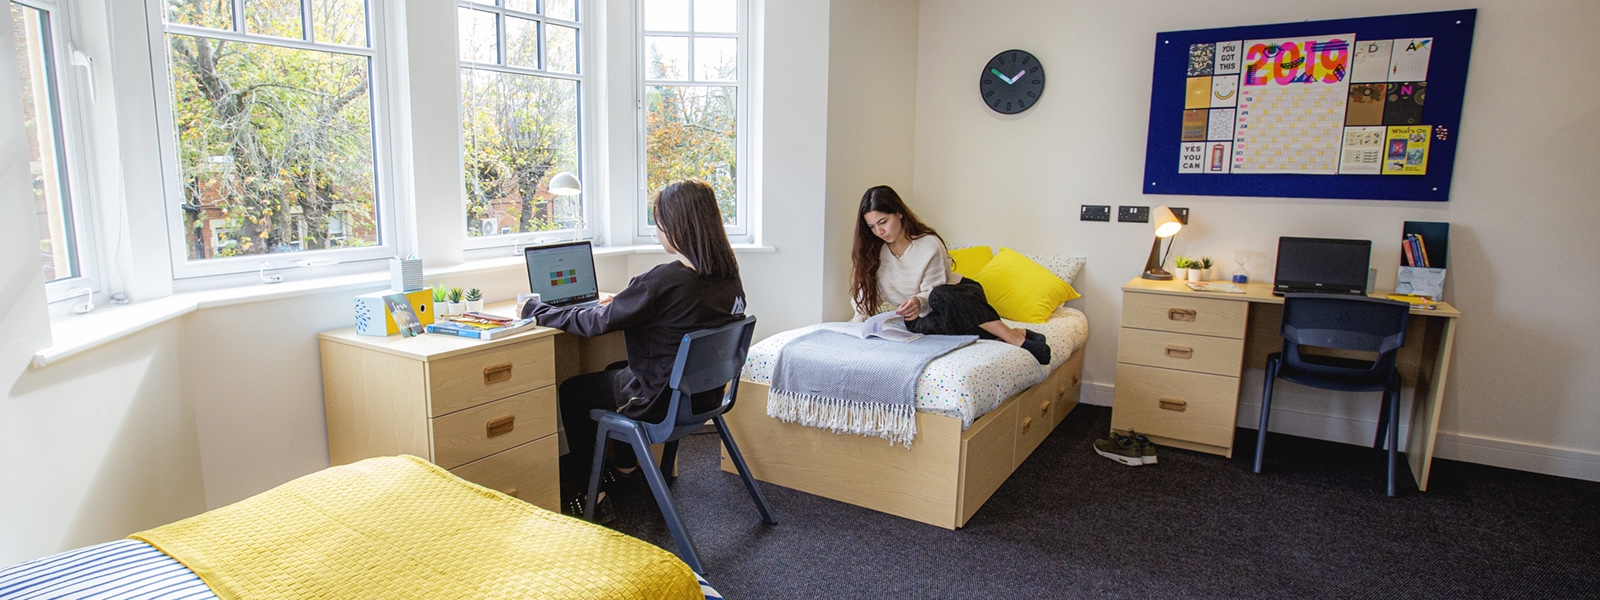 CATS Canterbury opens new student accommodation